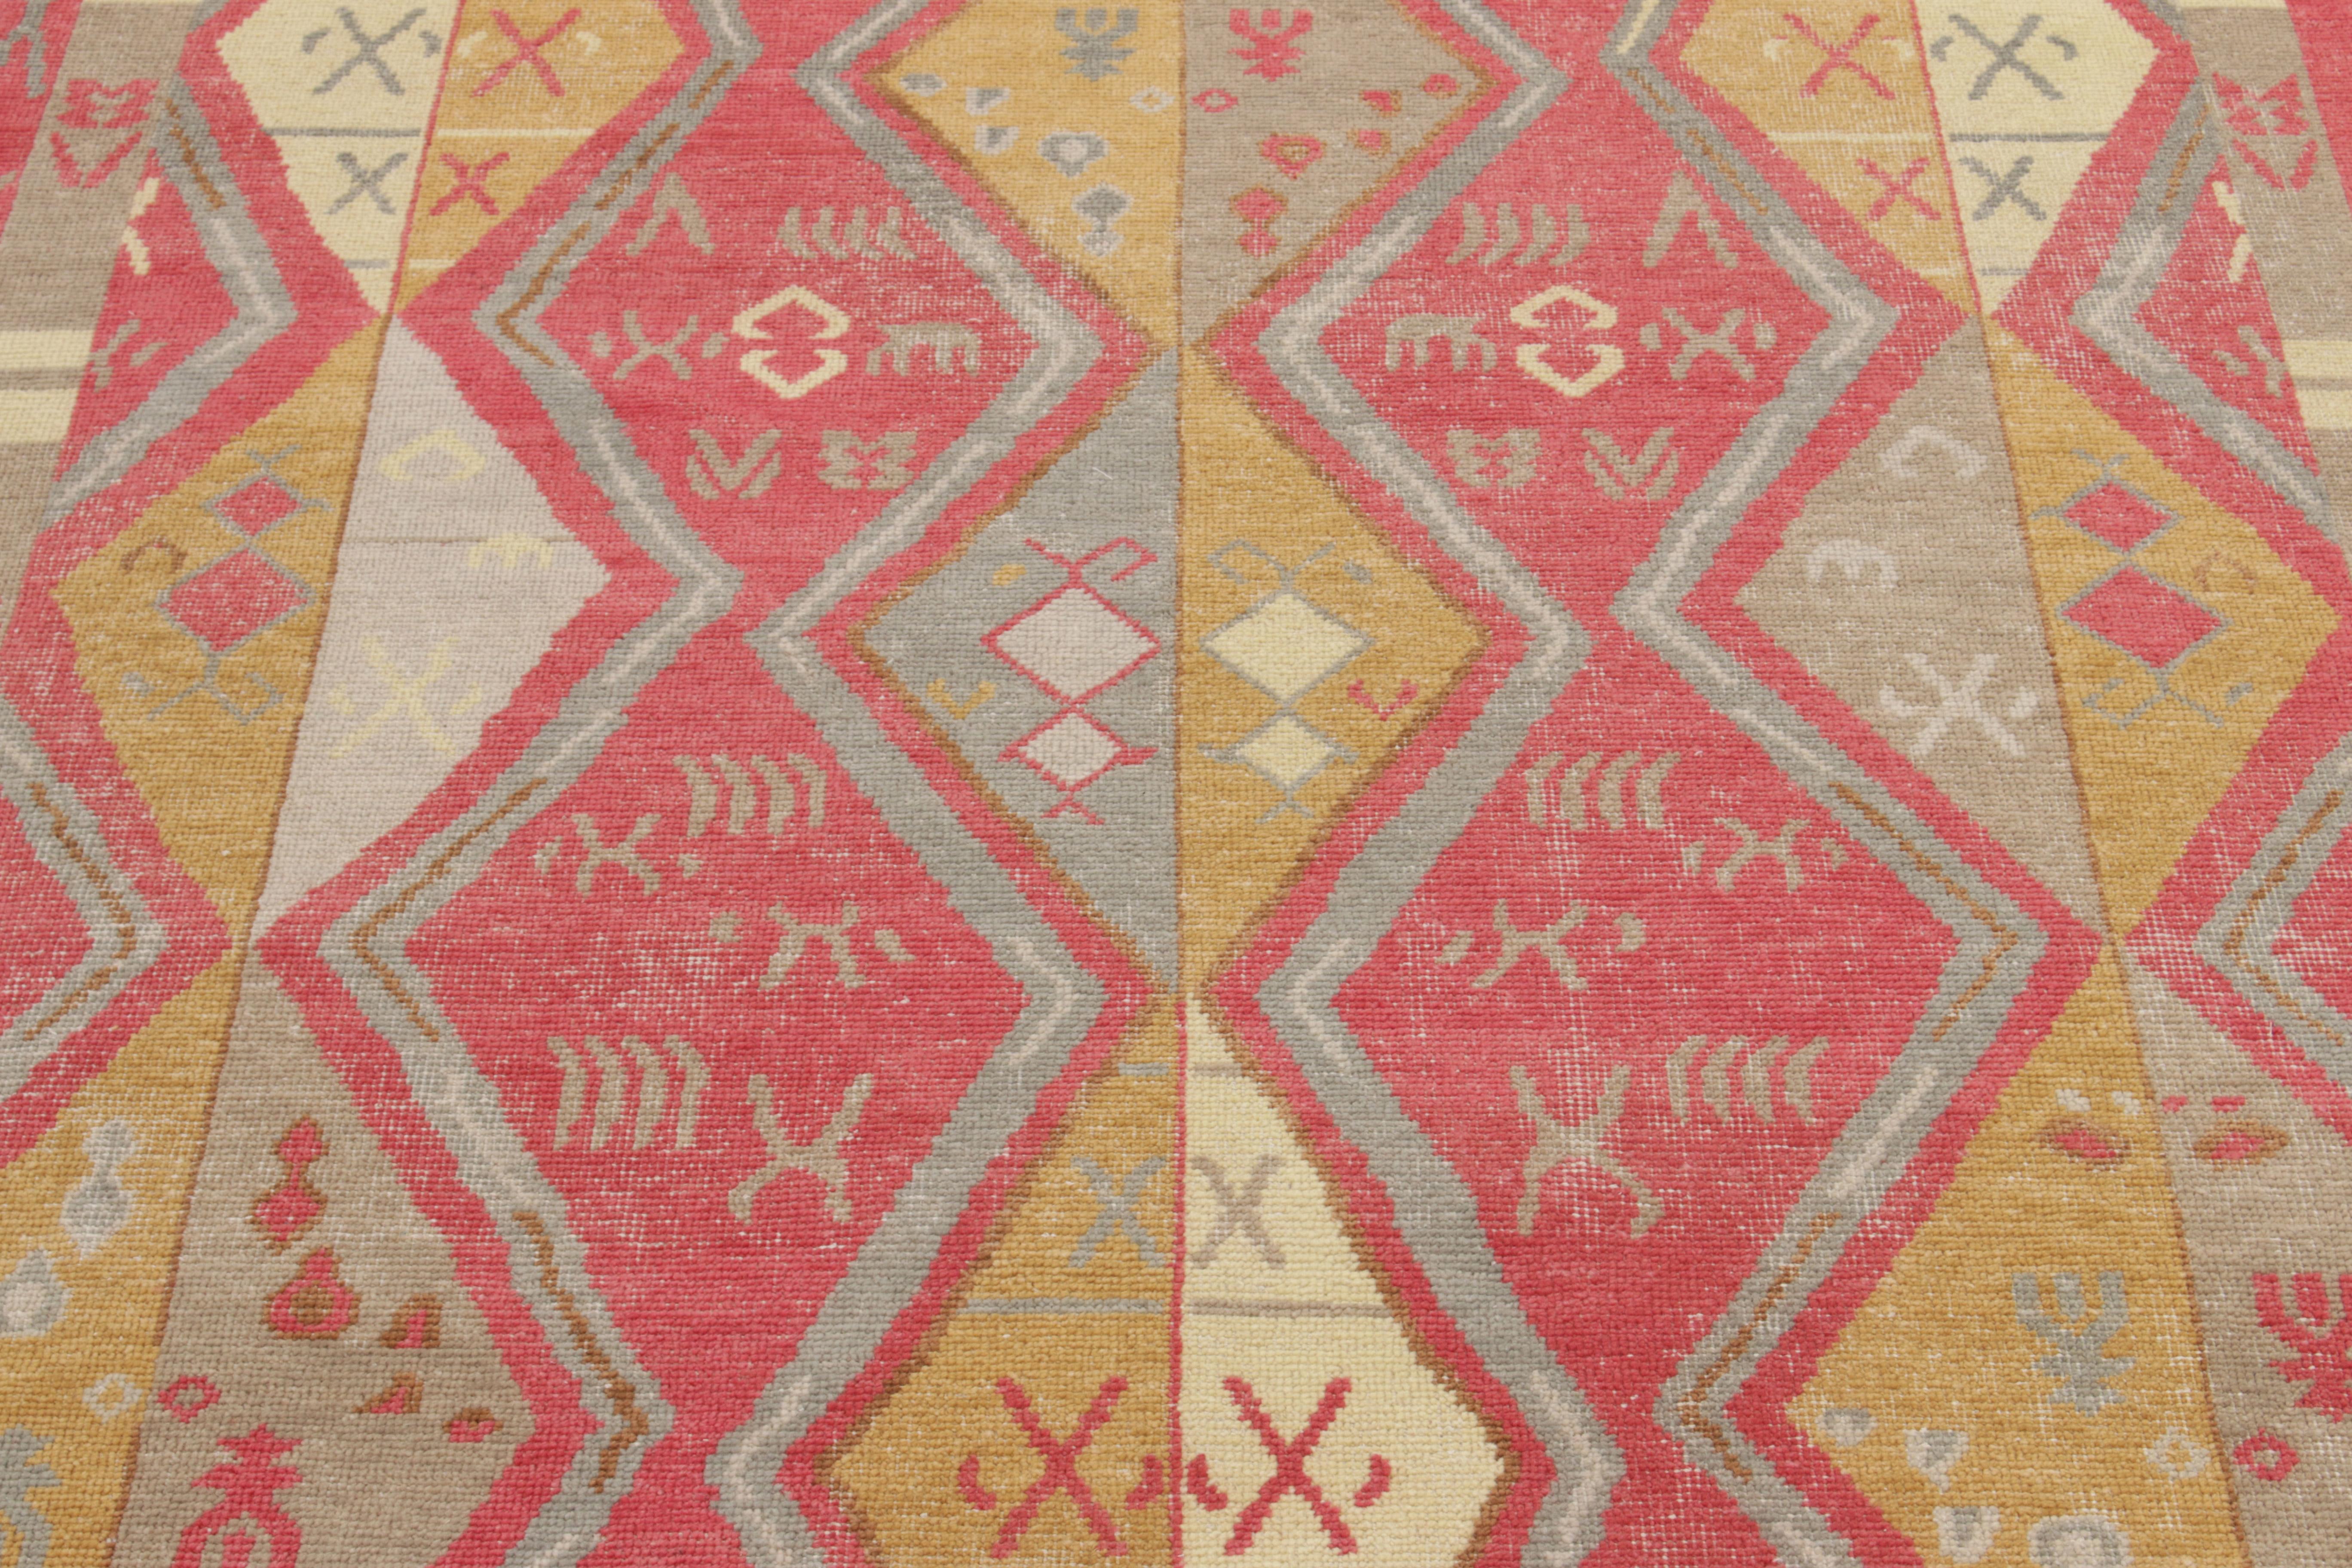 Indian Rug & Kilim's Distressed Yuruk Style Rug in Red, Gray, Gold Diamond Pattern For Sale